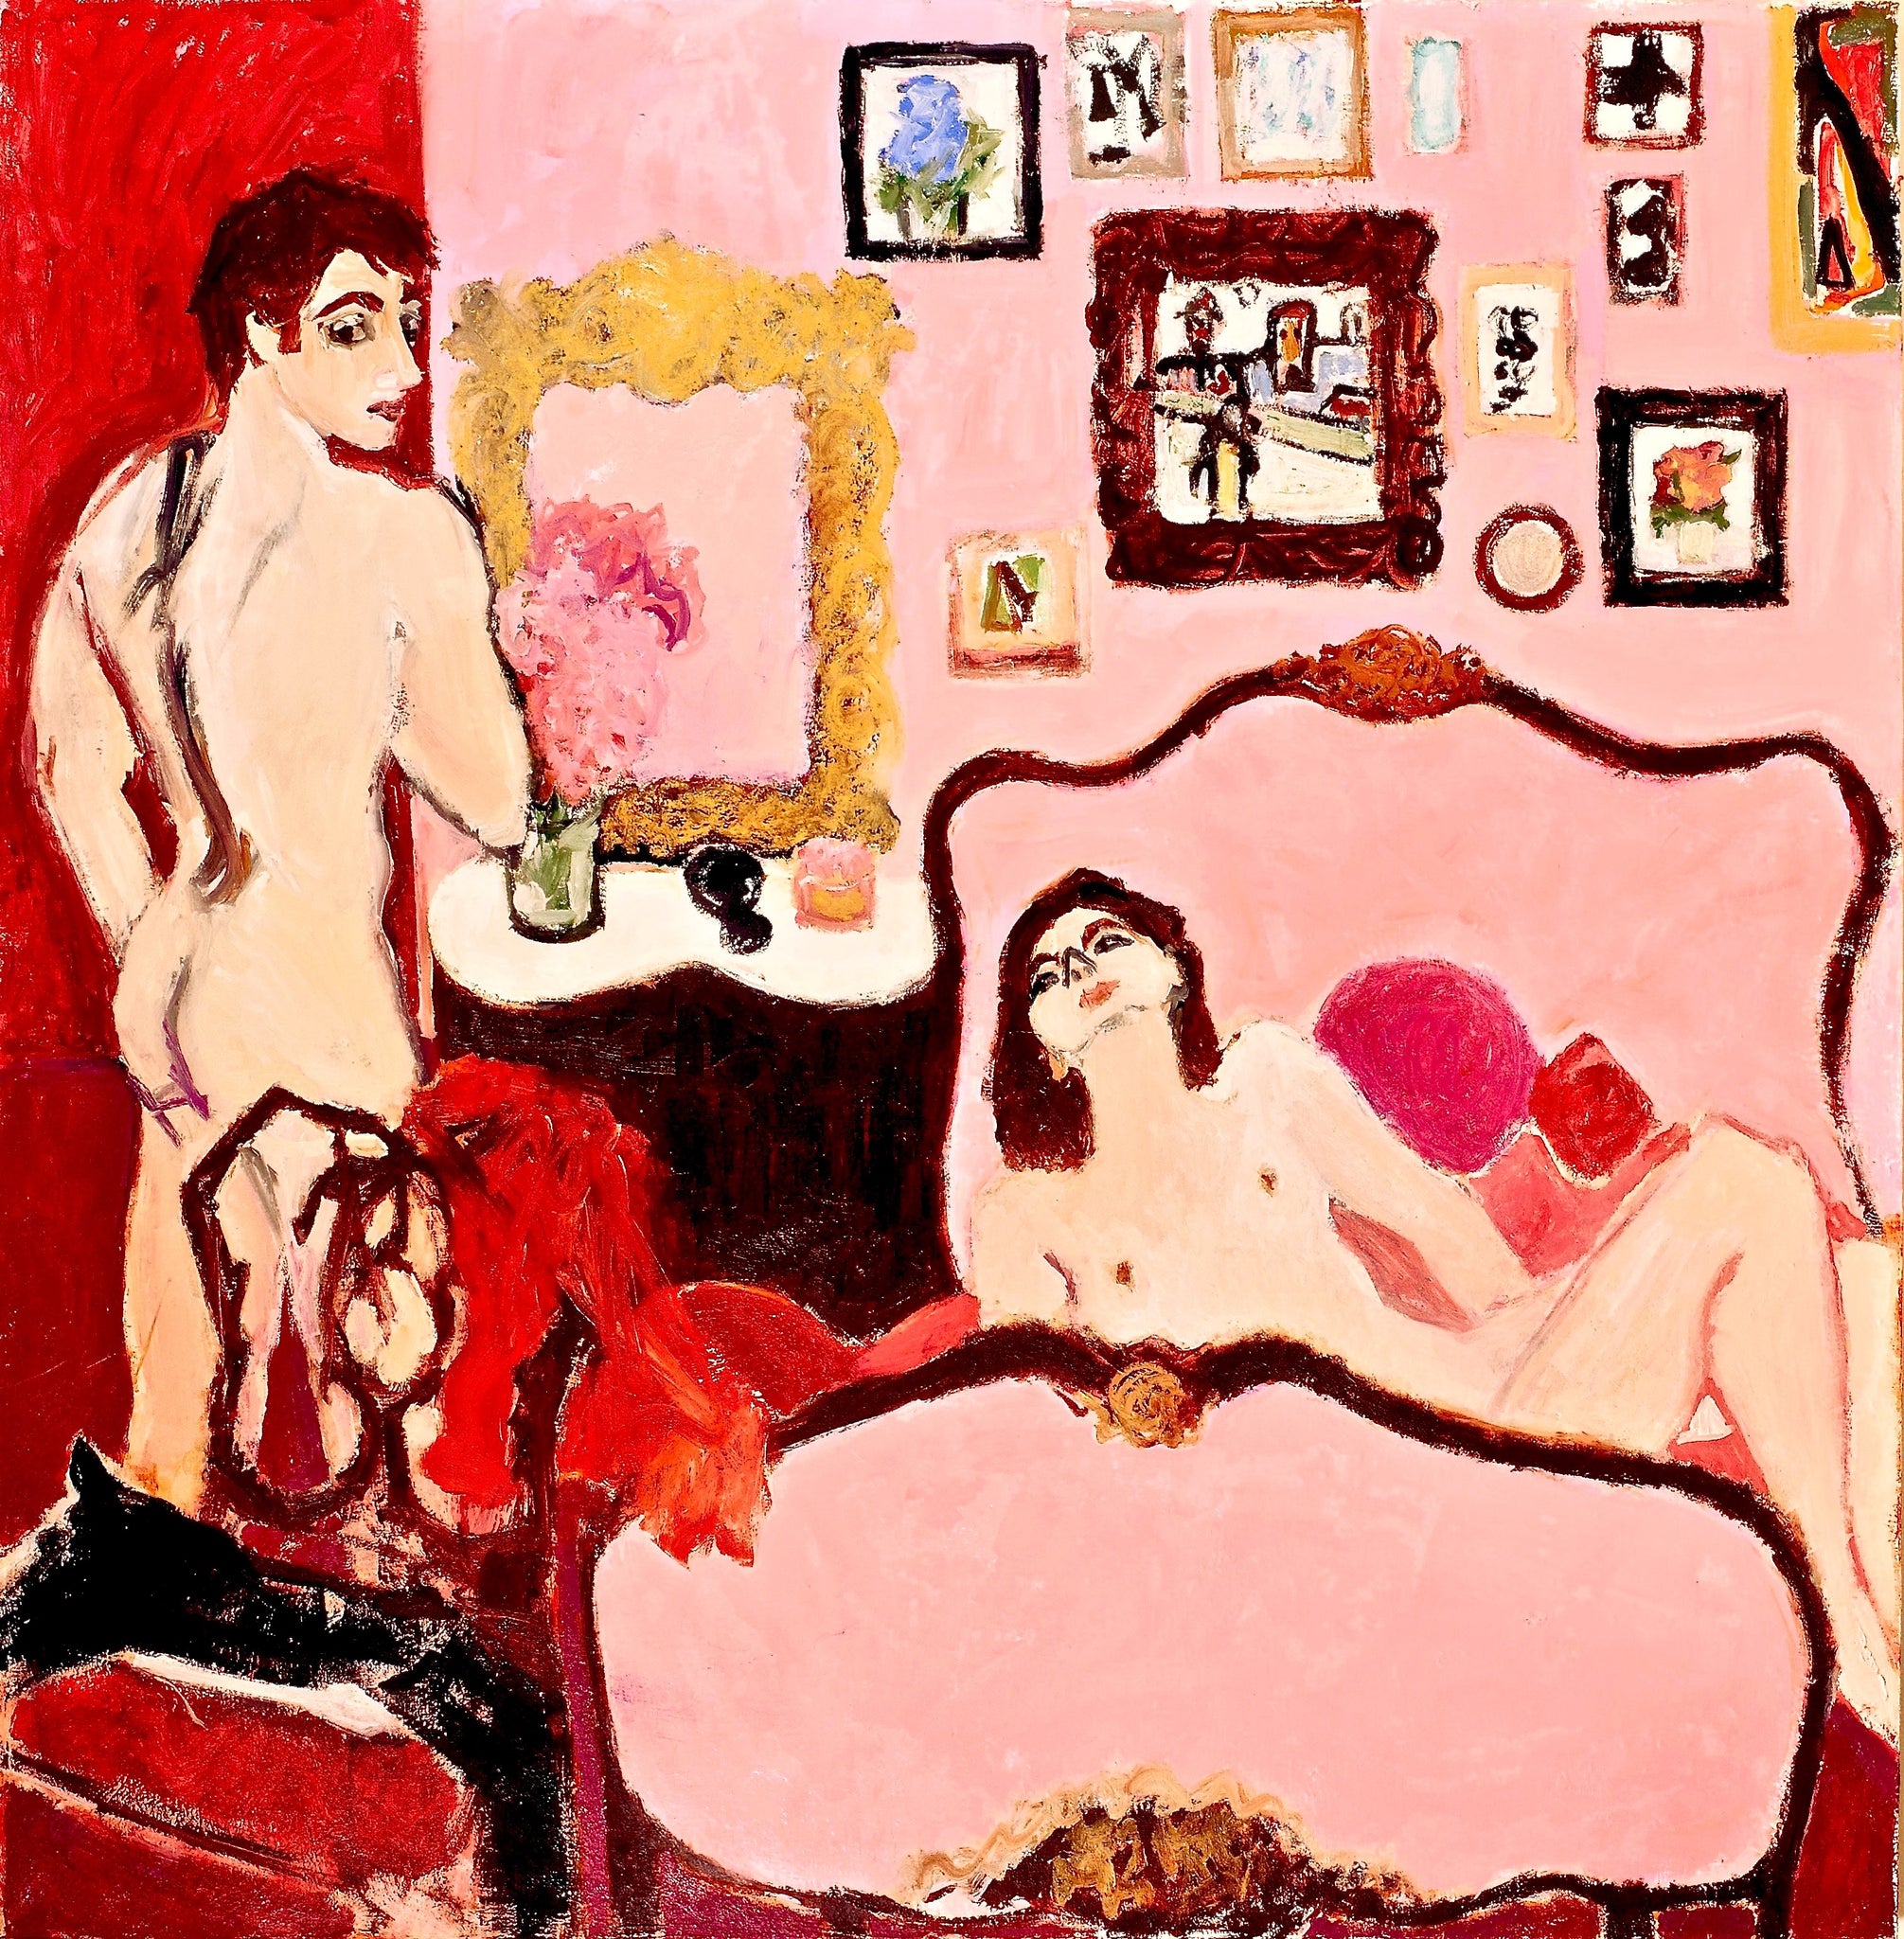 Betsy Podlach, 'The Pink Bedroom', 2020